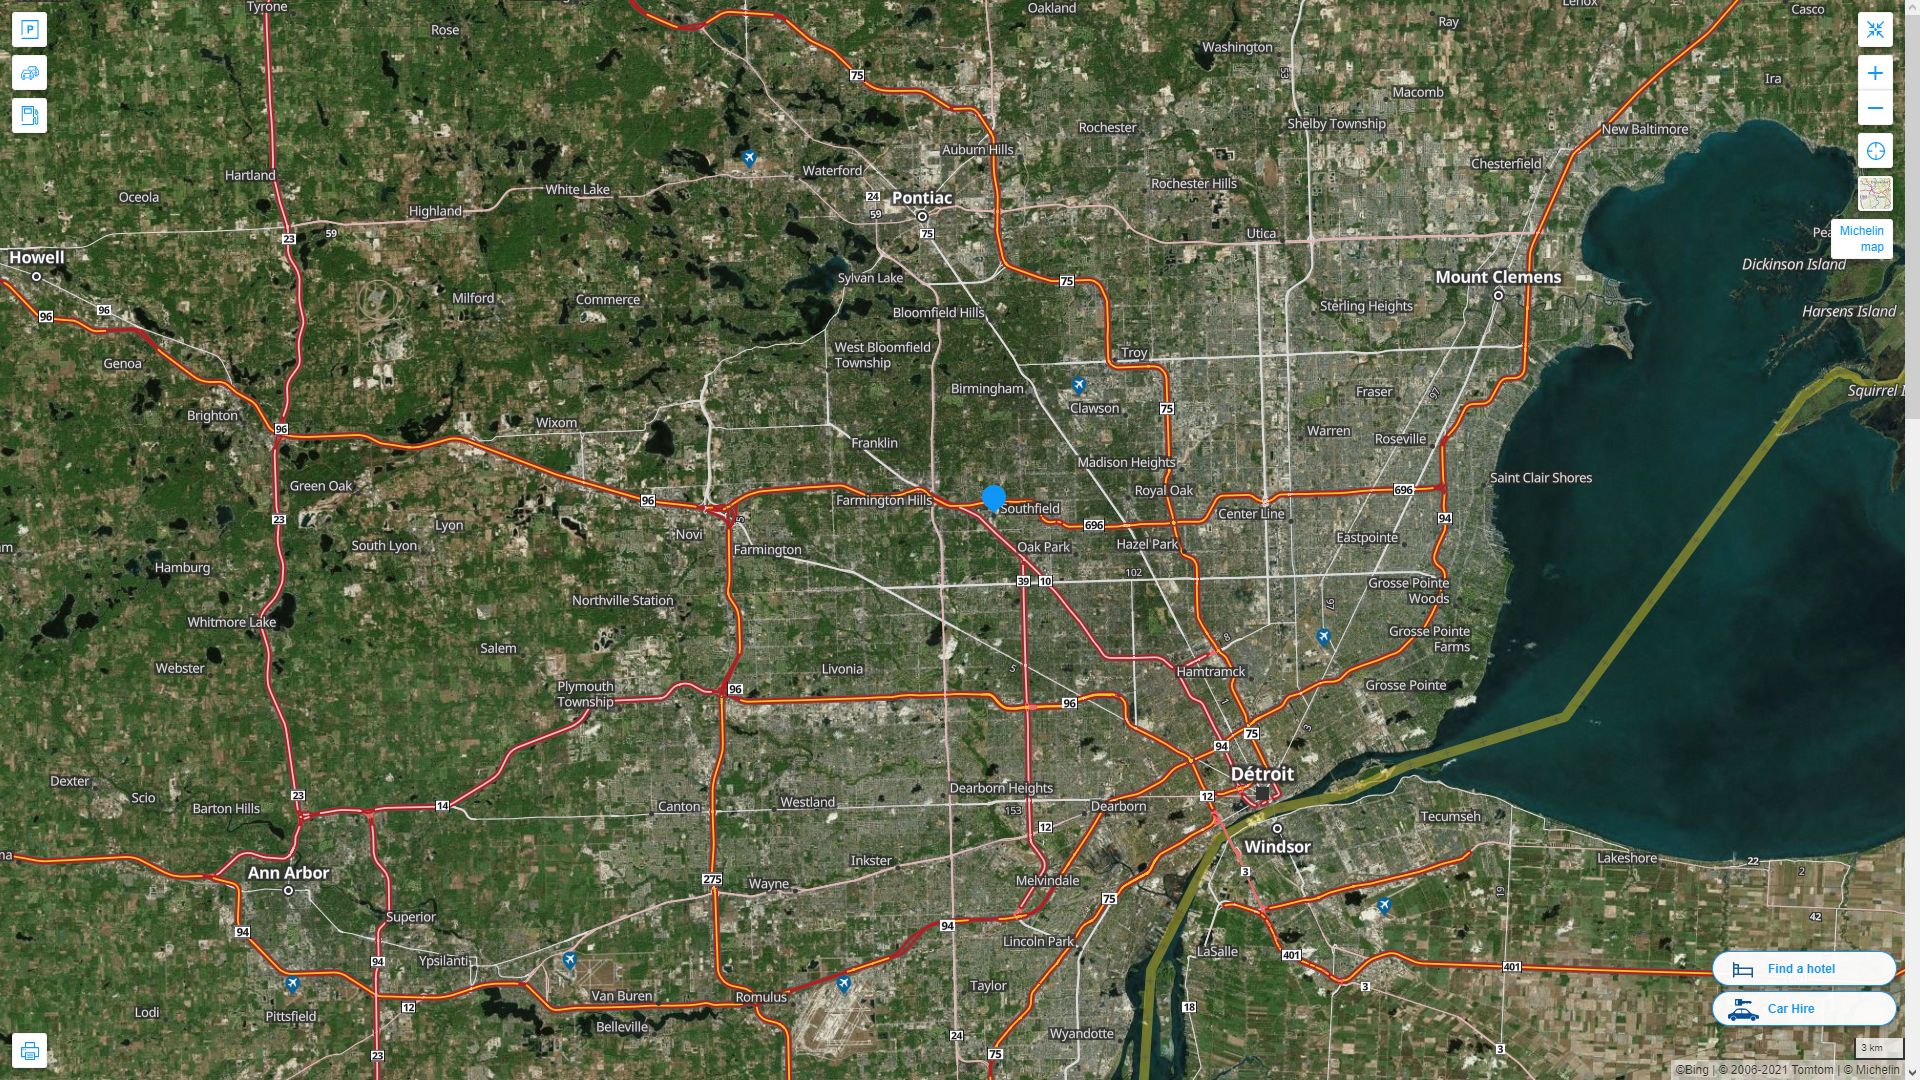 Southfield Michigan Highway and Road Map with Satellite View